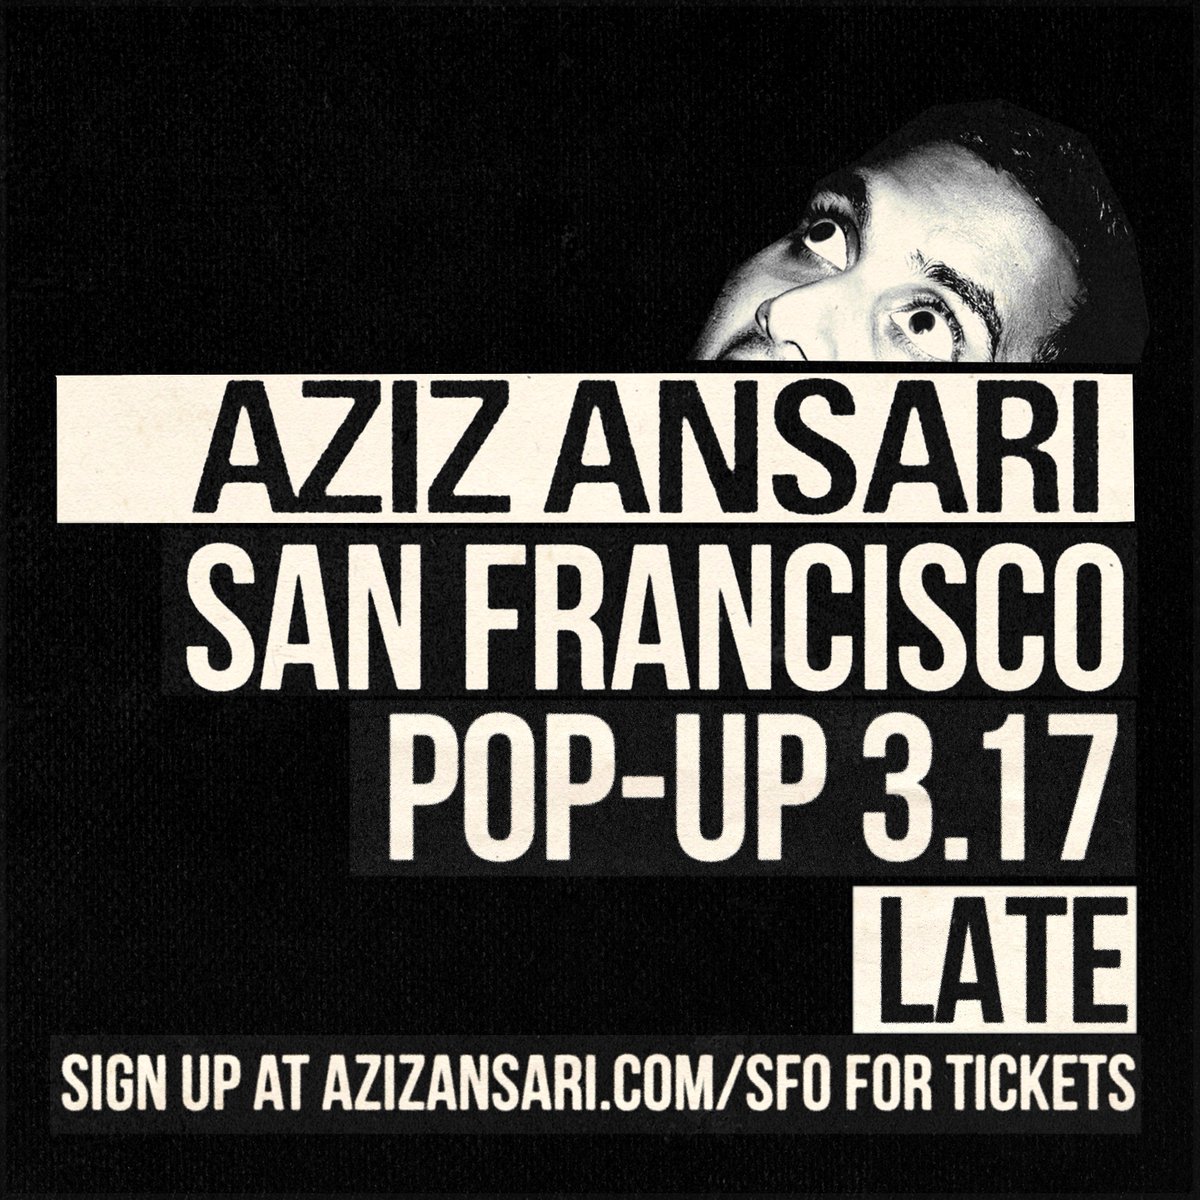 SF: All shows sold out, but we have added a tiny show late on Sunday. Get tickets here:  